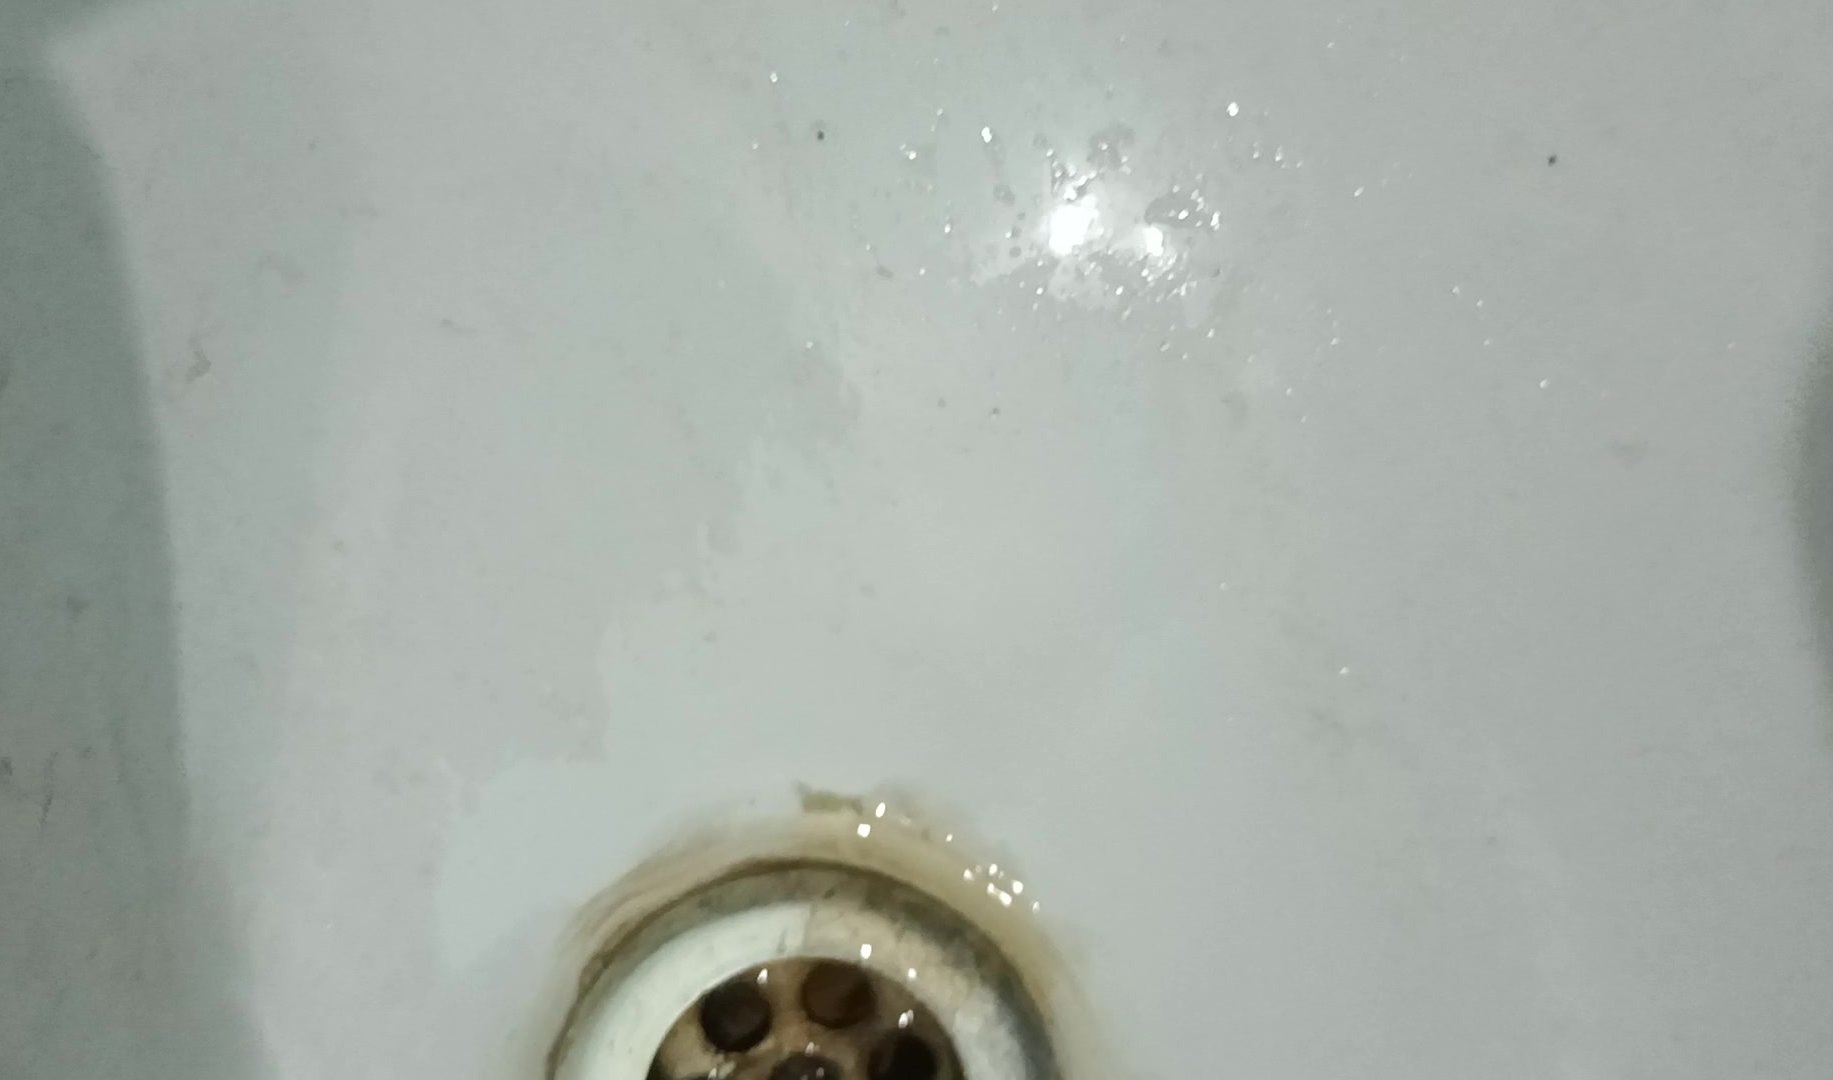 Puking up in the sink